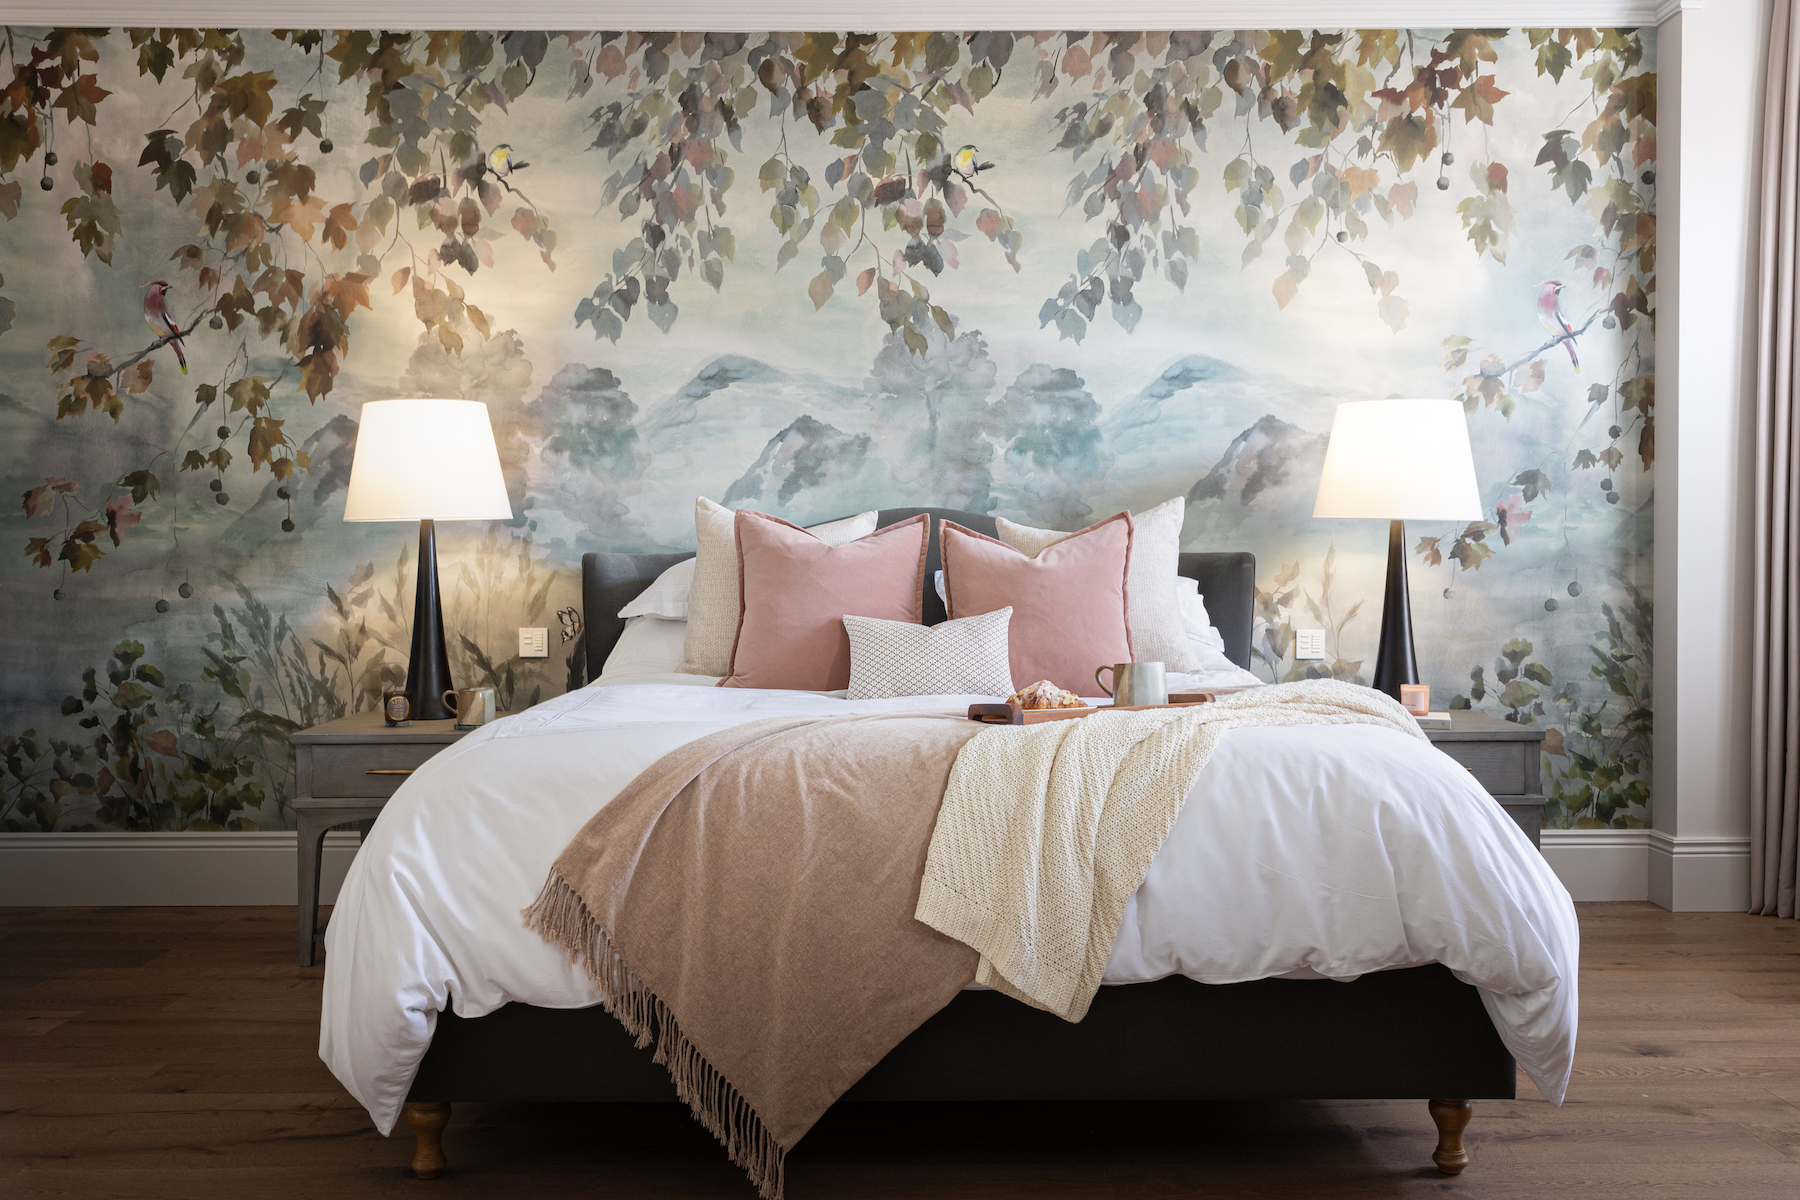 Contemporary Bedroom Designed with Bespoke headboard and Mural Wallpaper by Pfeiffer Design. Neutral colour palette with warm lighting design